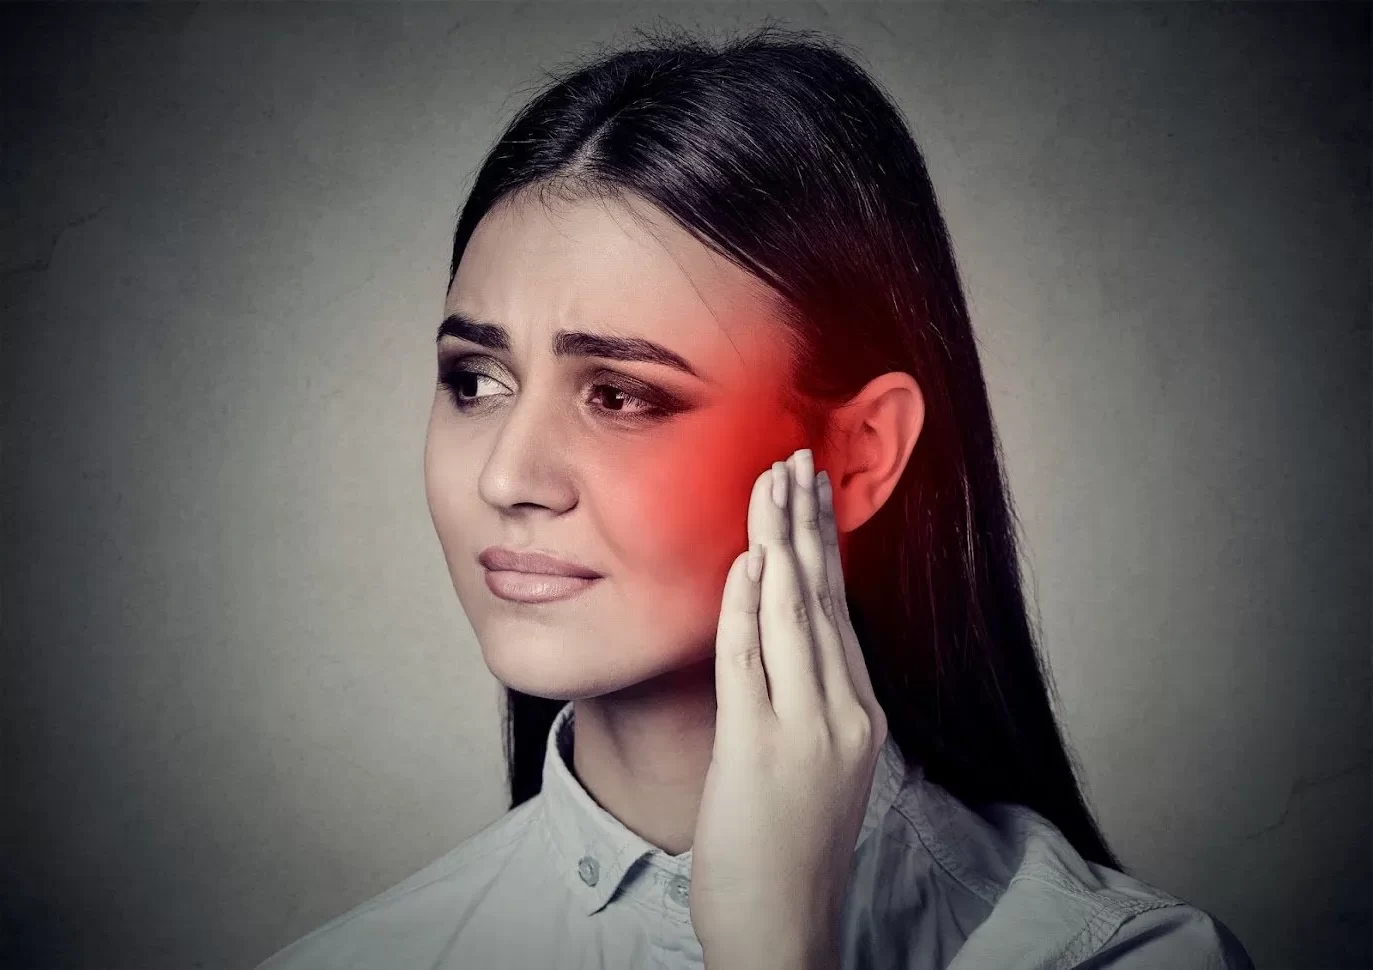 tooth infection cause tinnitus